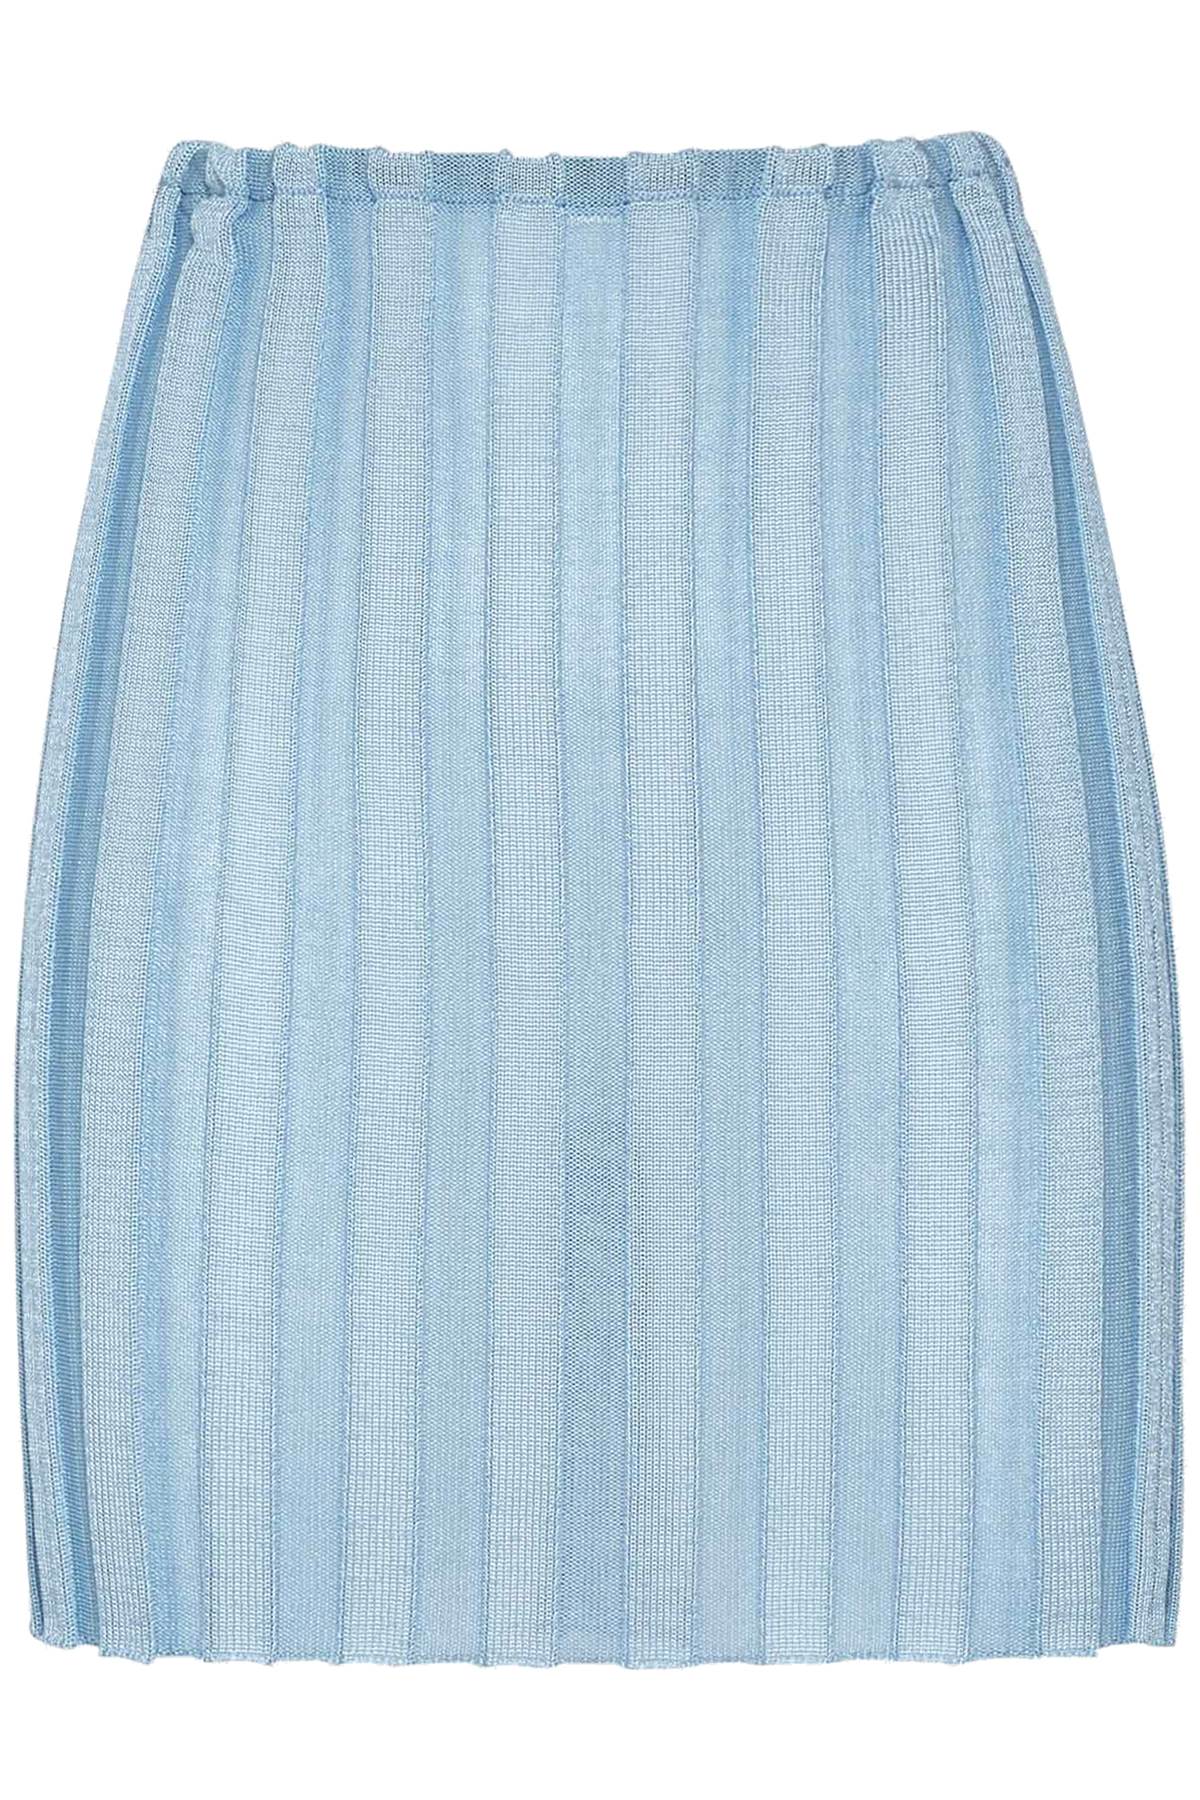 Shop A. Roege Hove Katrine Mini Skirt In Icy Blue (light Blue)